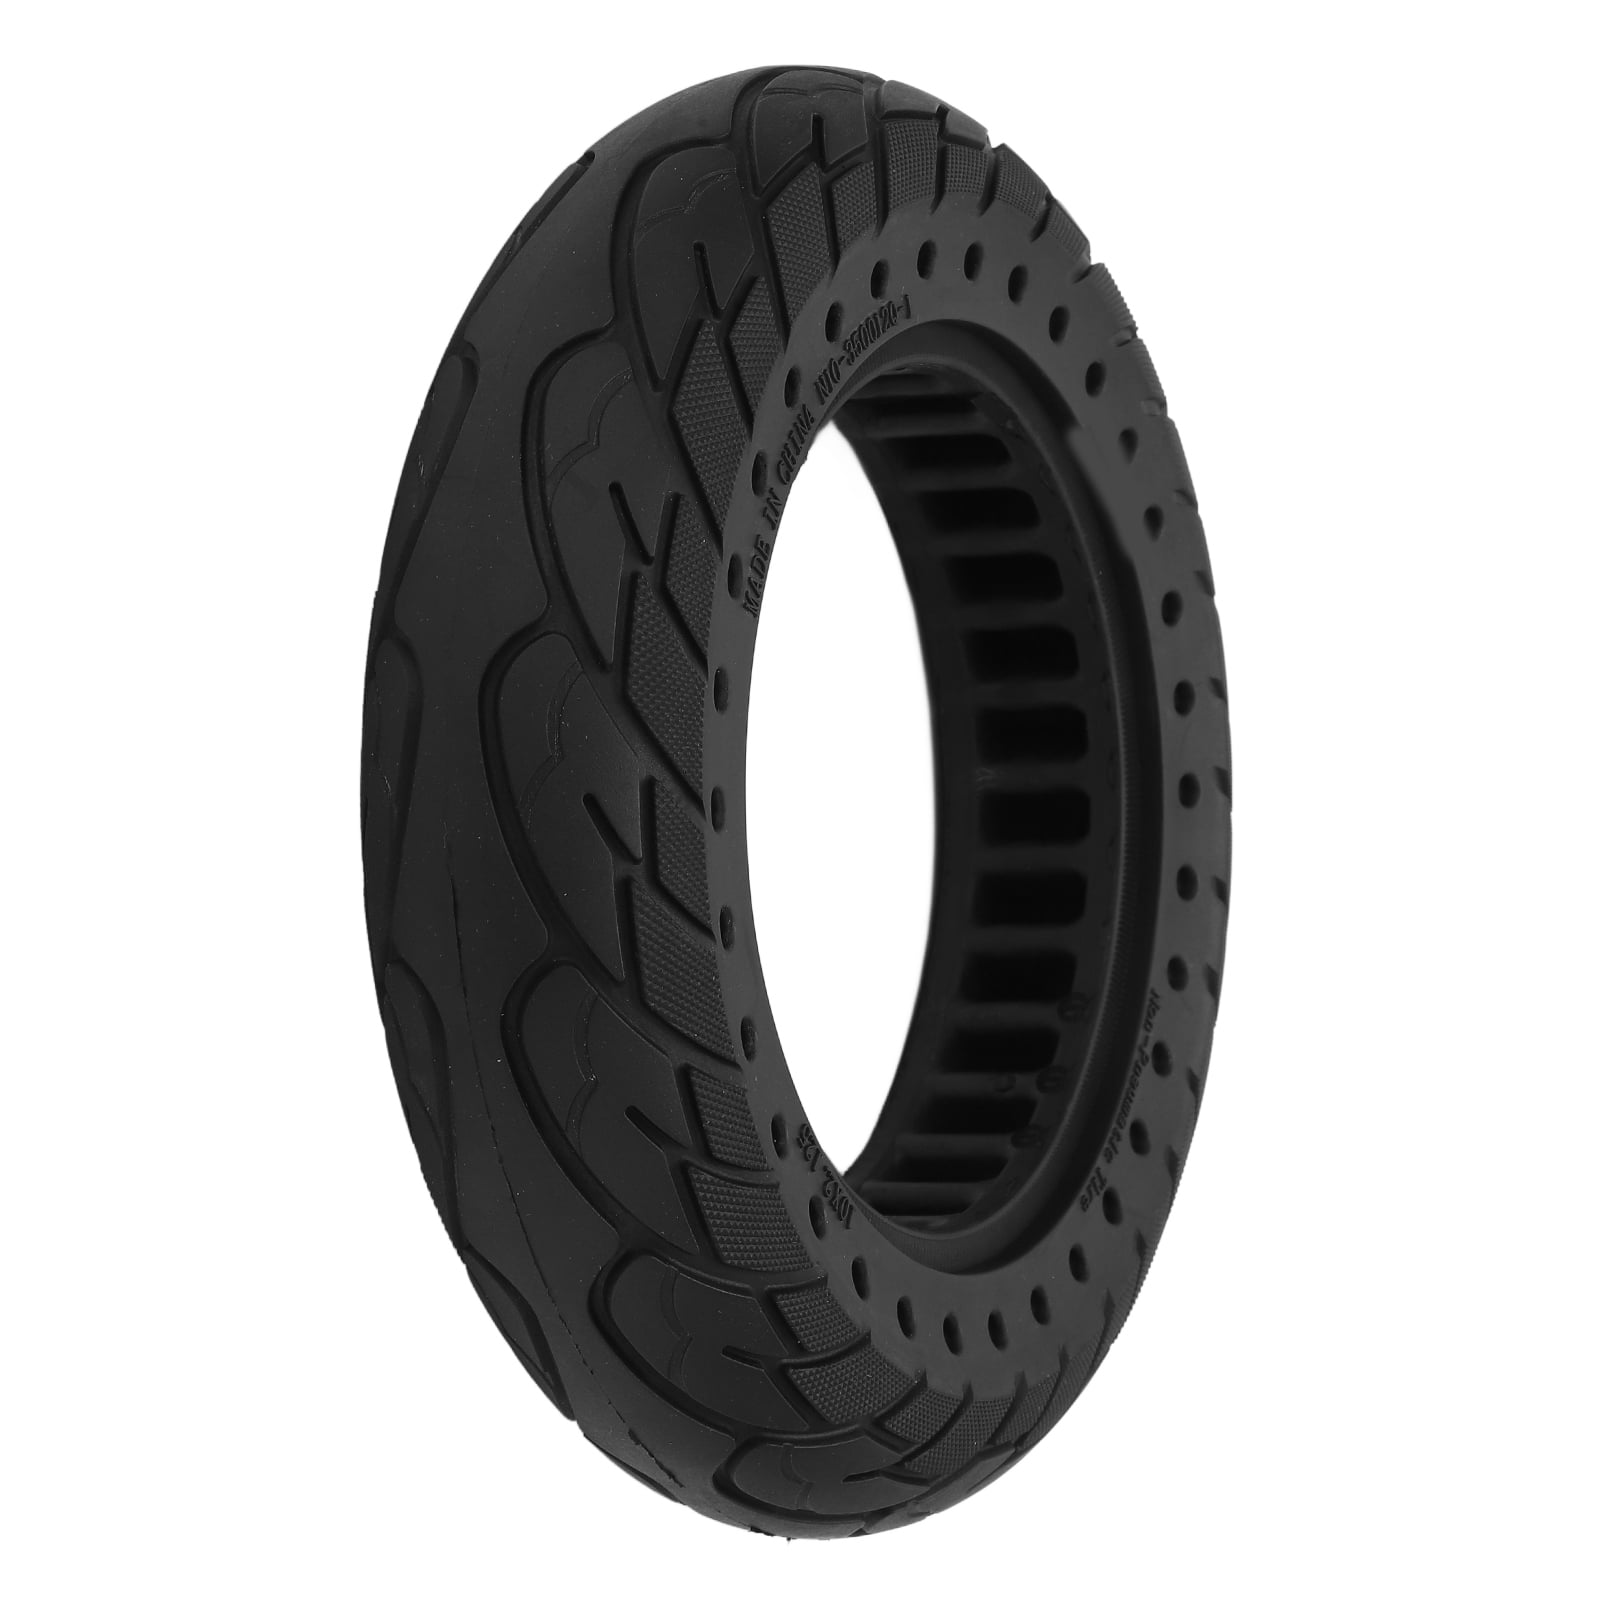  Cooryda Solid Tire,10 inches Electric Scooter Wheels 10x2.125  Tubeless Tyre Front or Rear Replacement Solid Rubber Tires for Electric  Scooter 1pc : Automotive